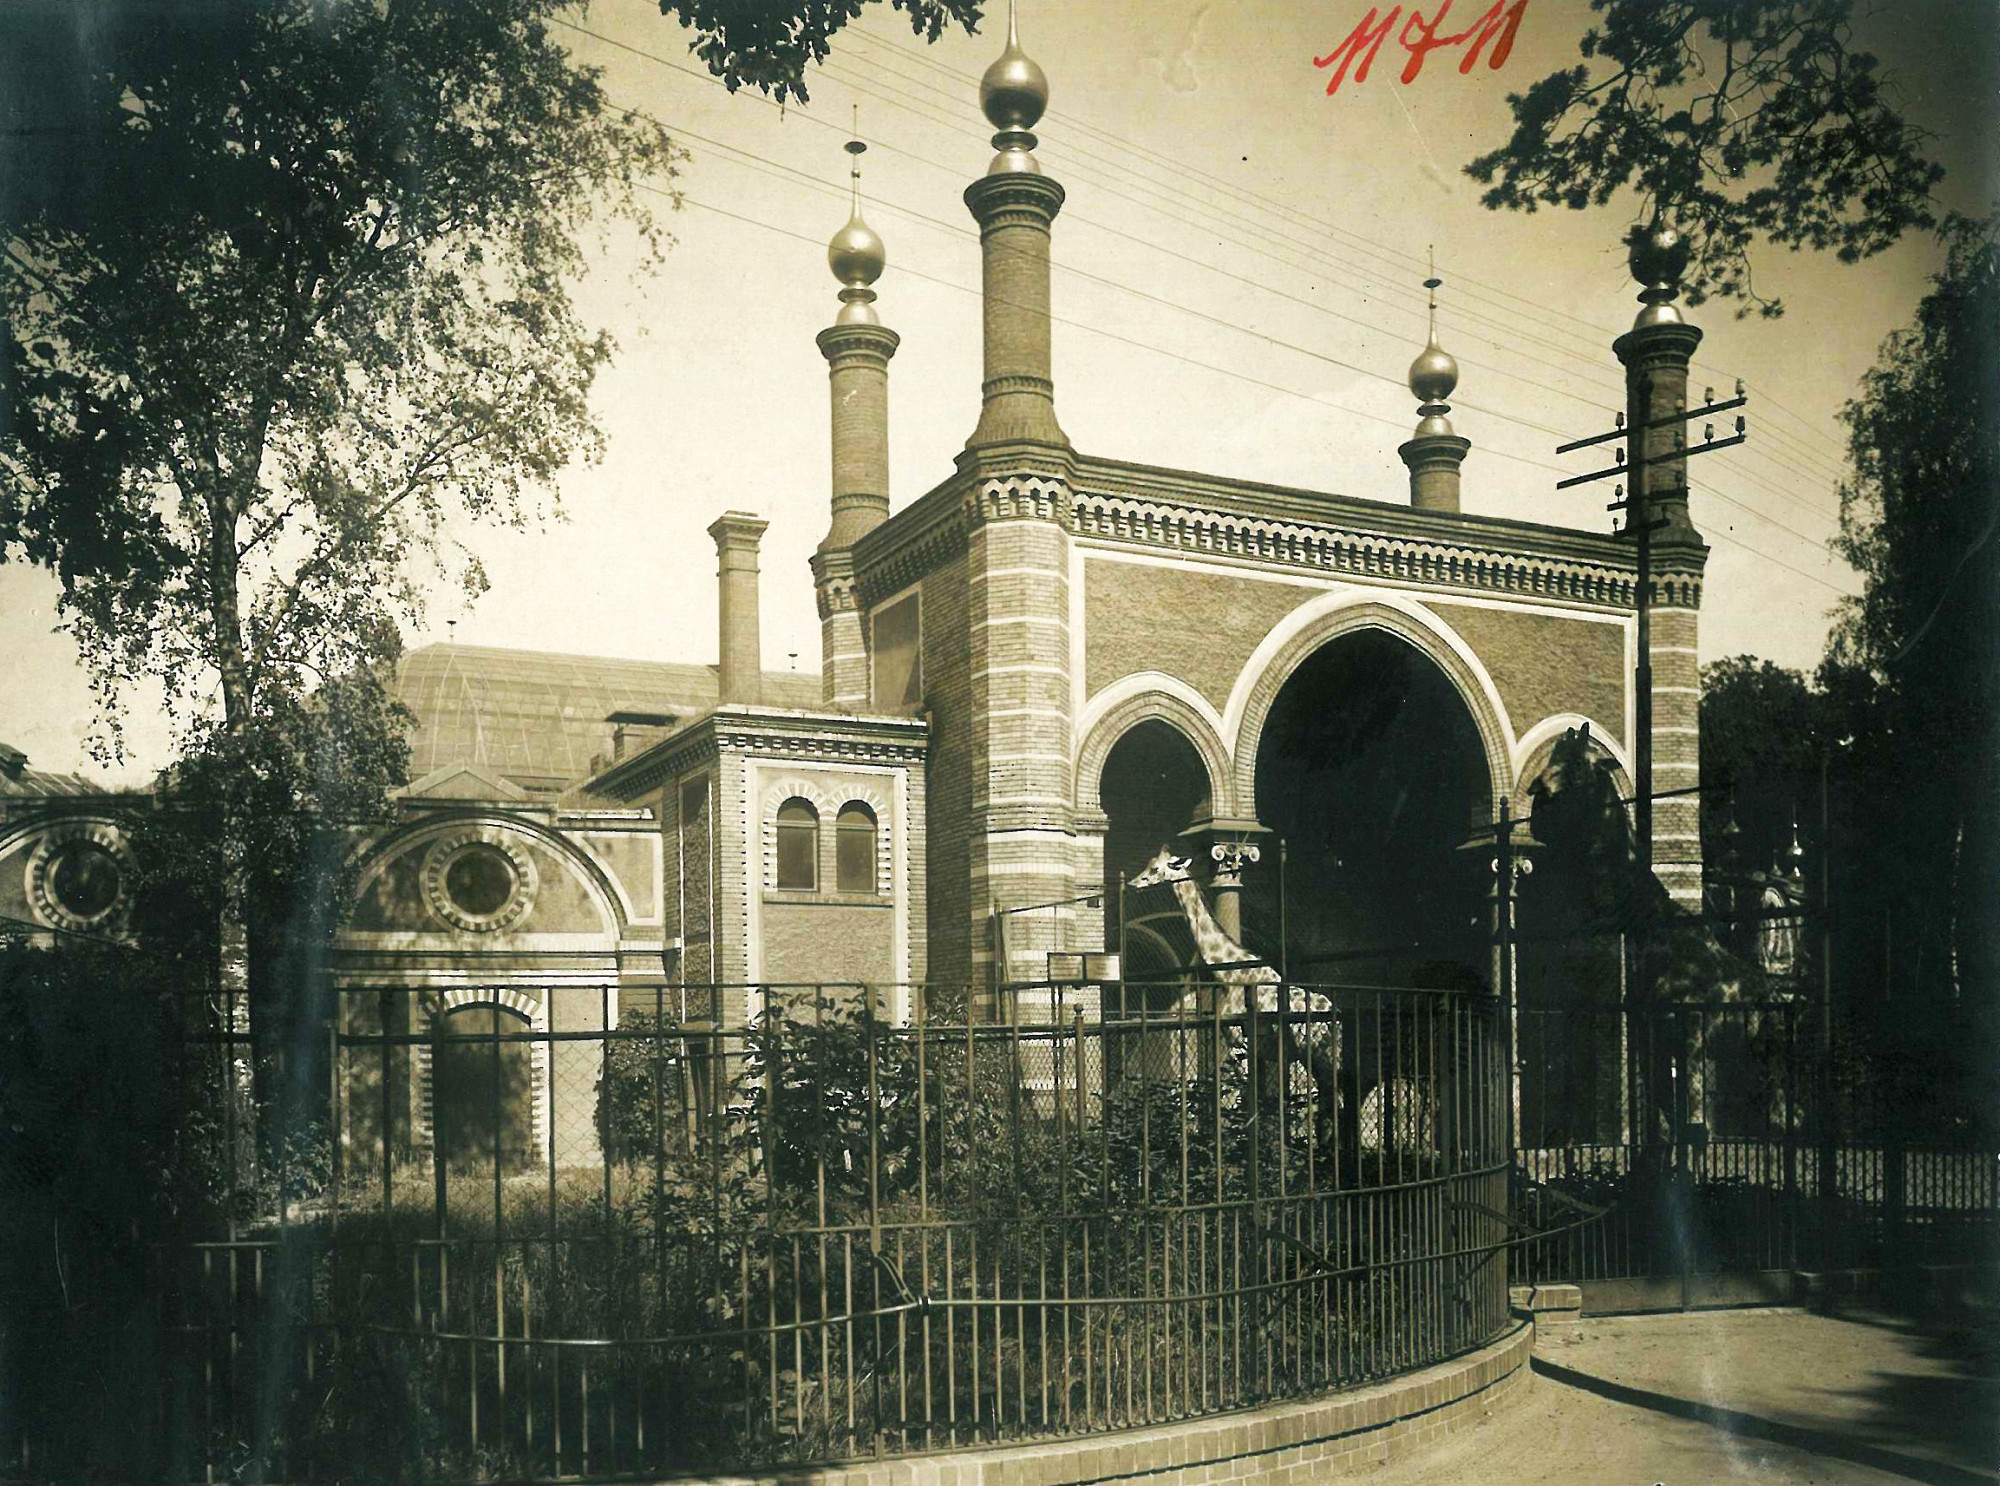 Black and white photo: building with Arabic / neo-Moorish repertoire of forms, including gemel windows, geometric decoration, horseshoe arches, and slender columns and towers In front of it, two giraffes stand behind a fence.